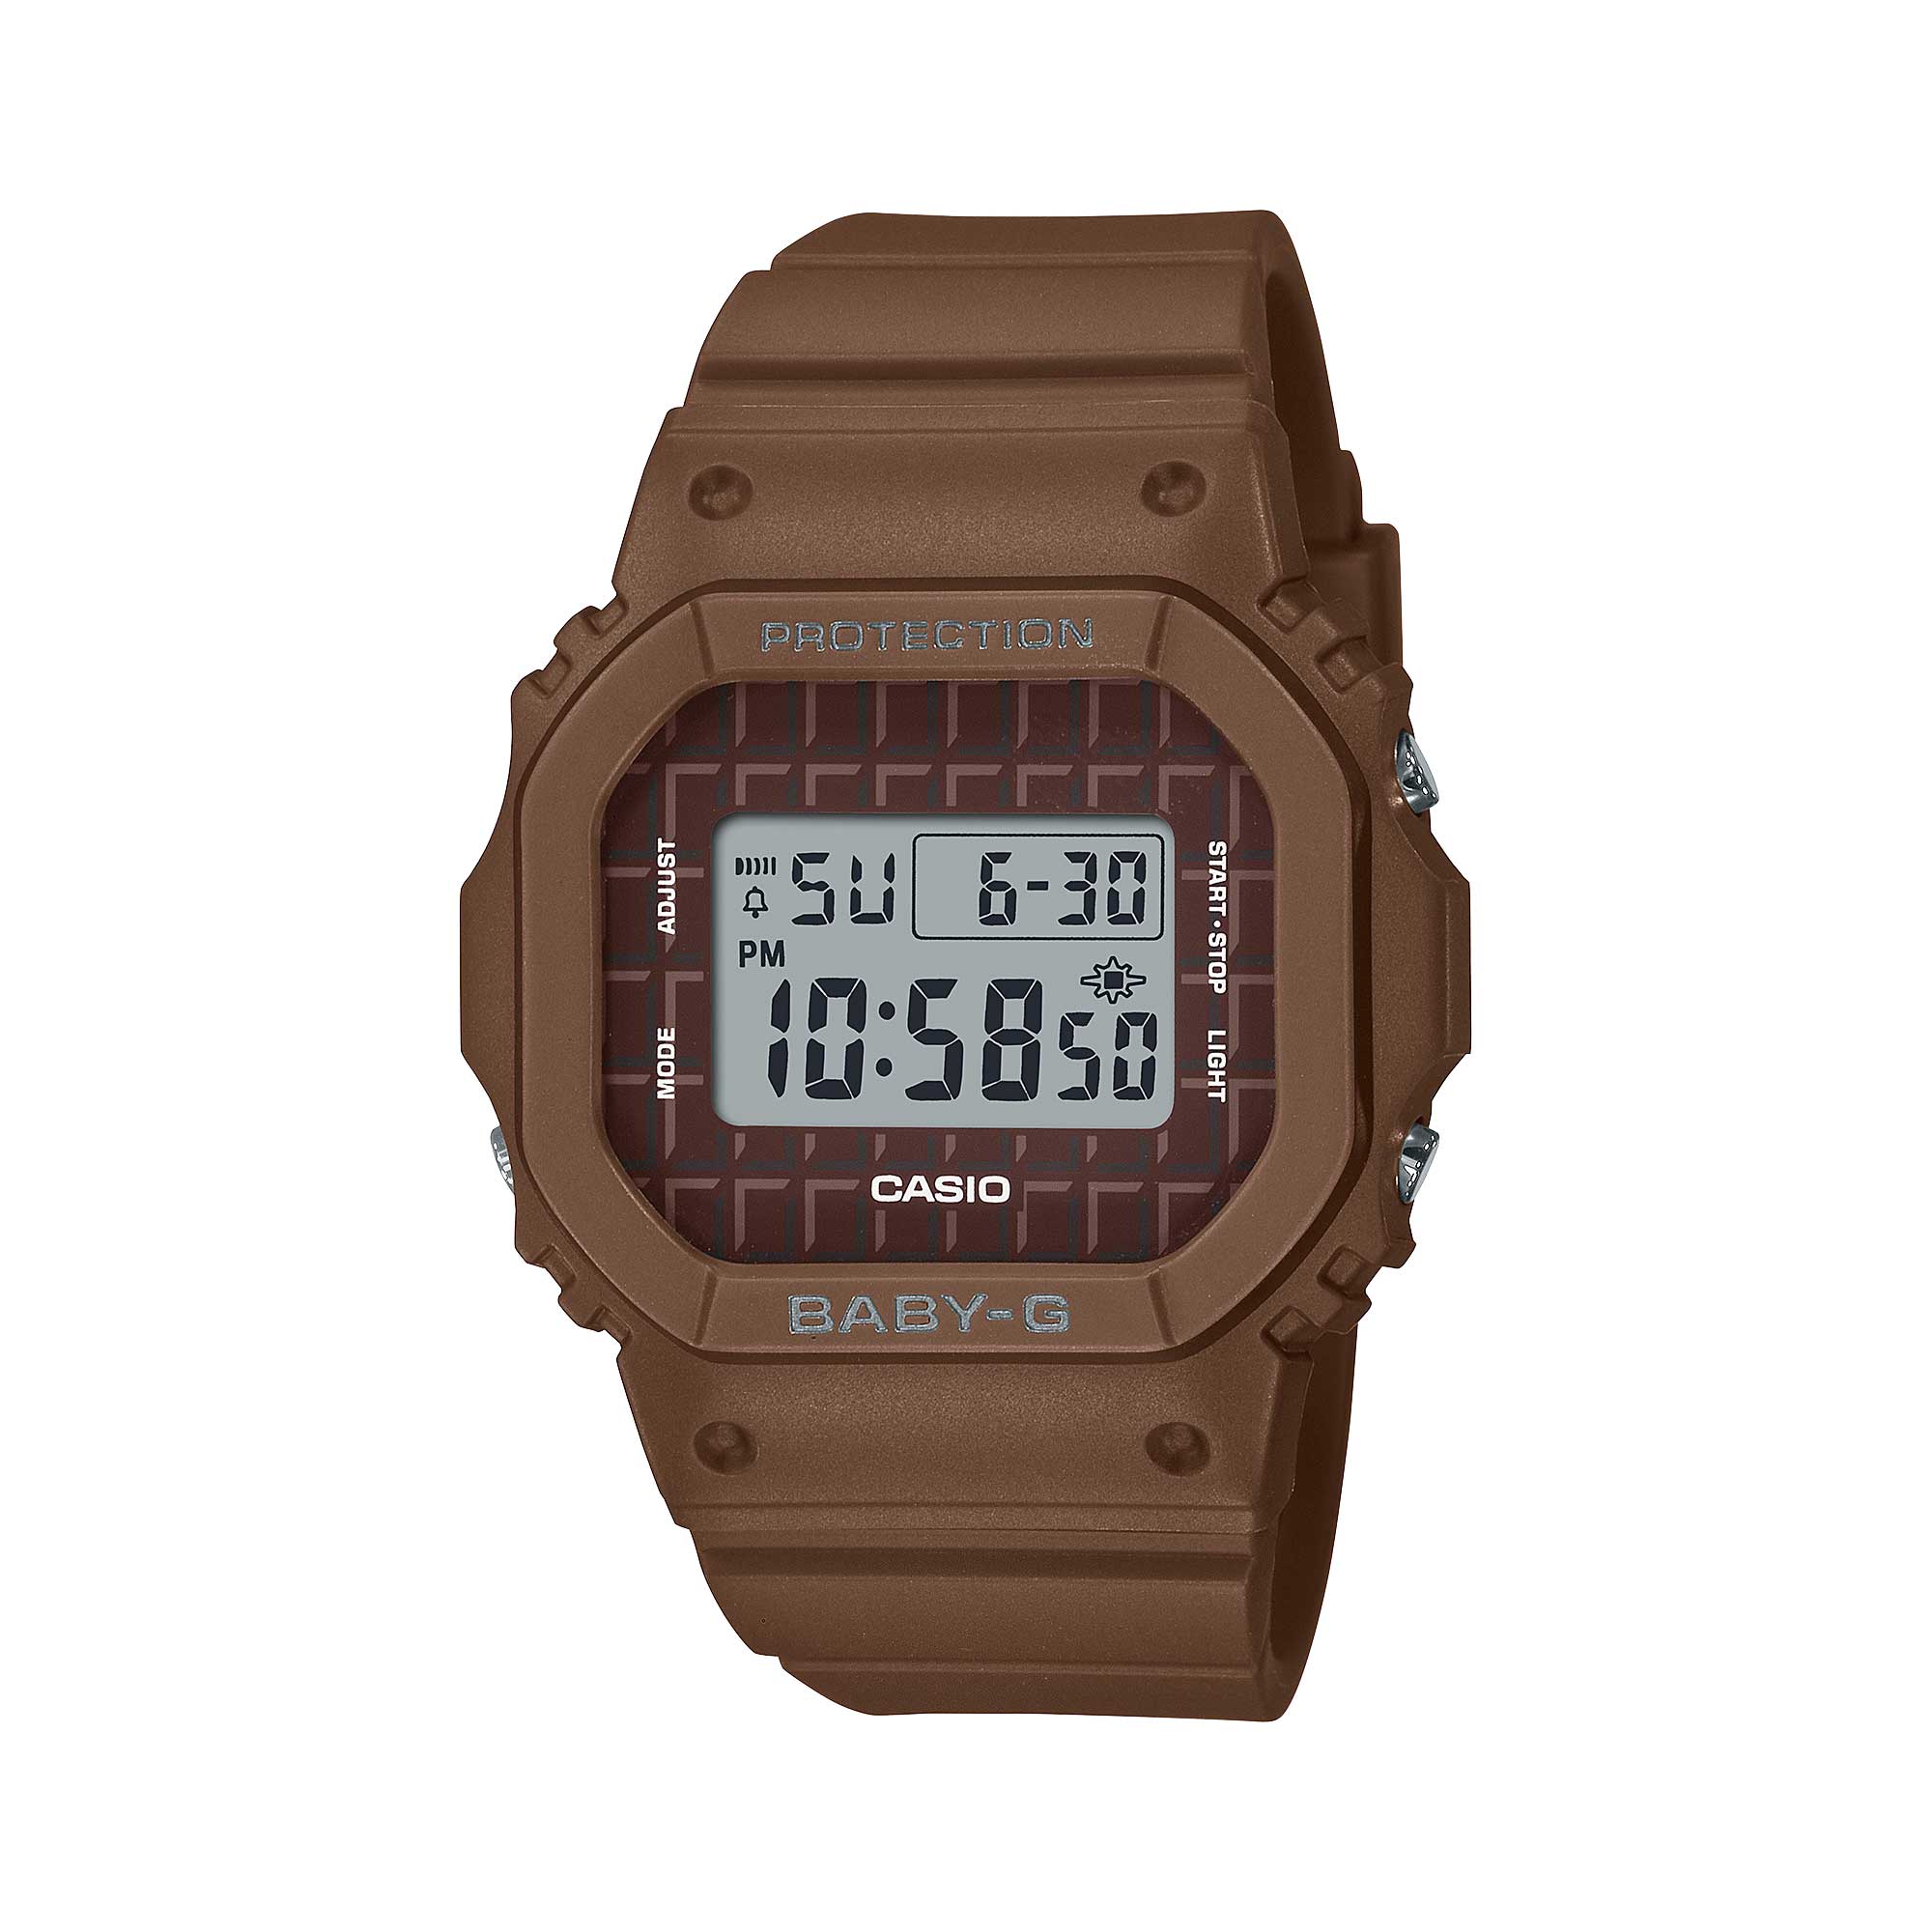 Casio Baby-G BGD-565 Lineup Sweets Collection Chocolate Brown Resin Band Watch BGD565USW-5D BGD-565USW-5D BGD-565USW-5 Watchspree